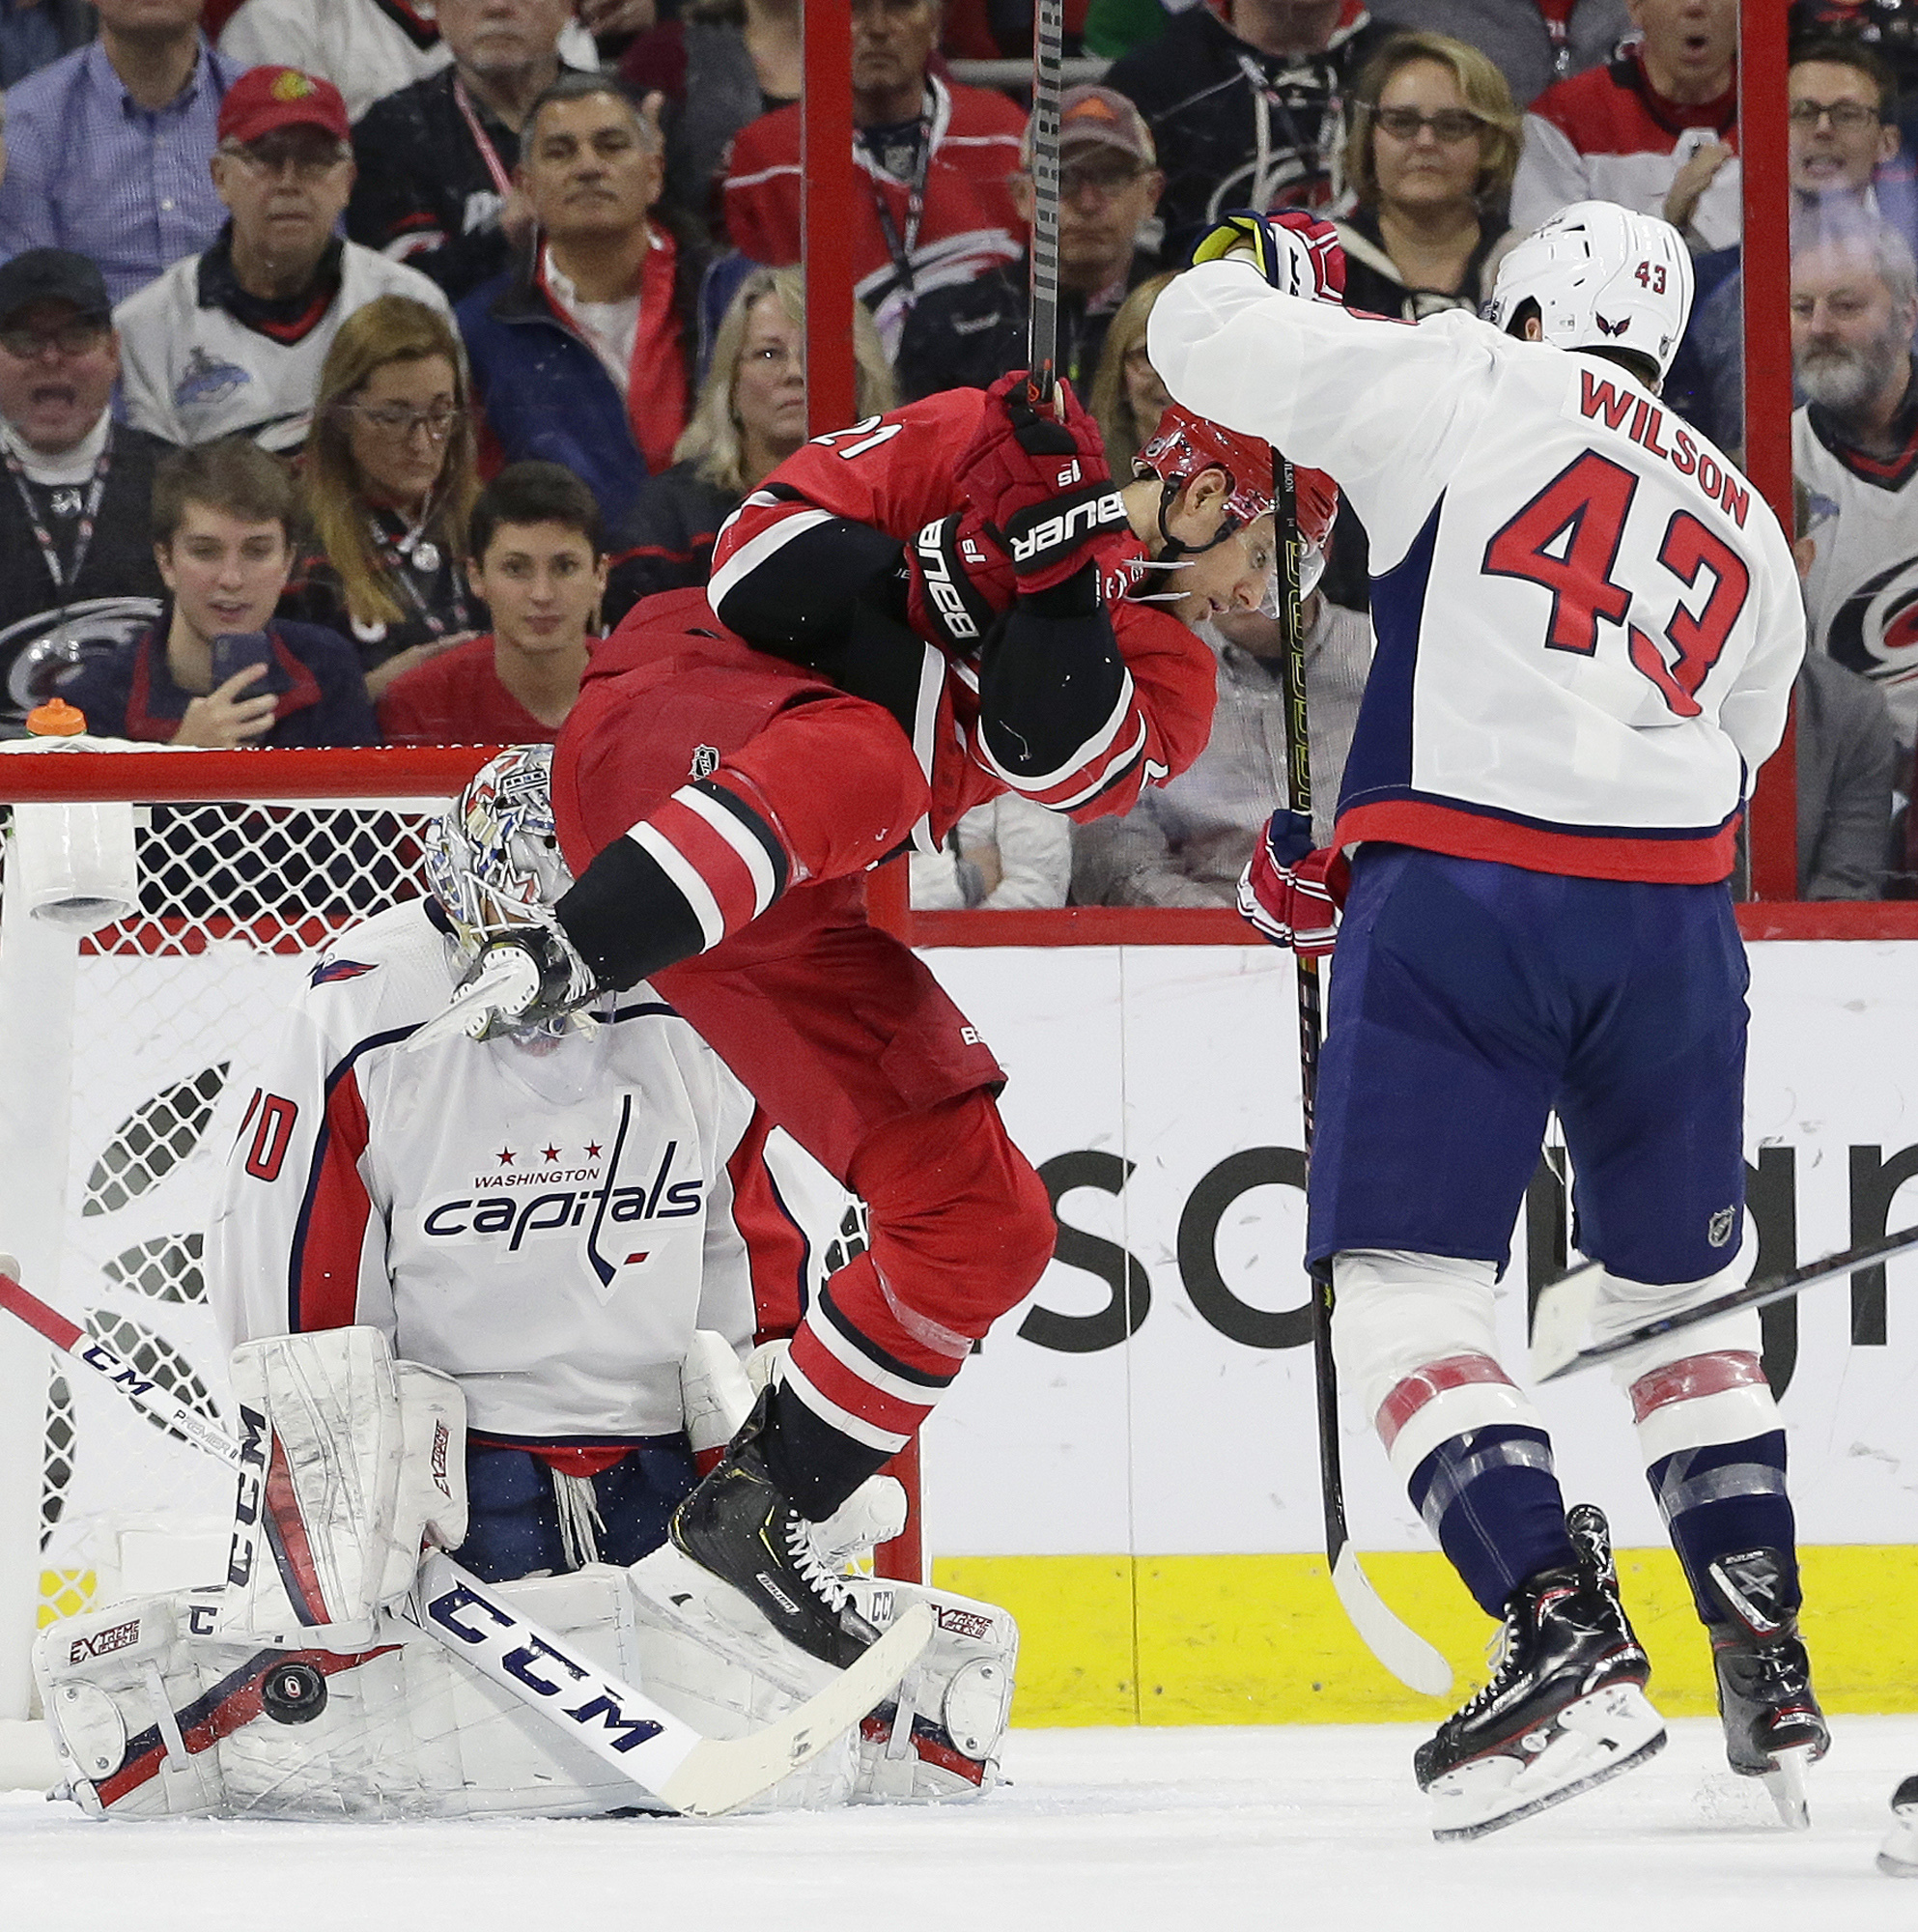 Capitals beat Hurricanes 3-2 to clinch playoff spot